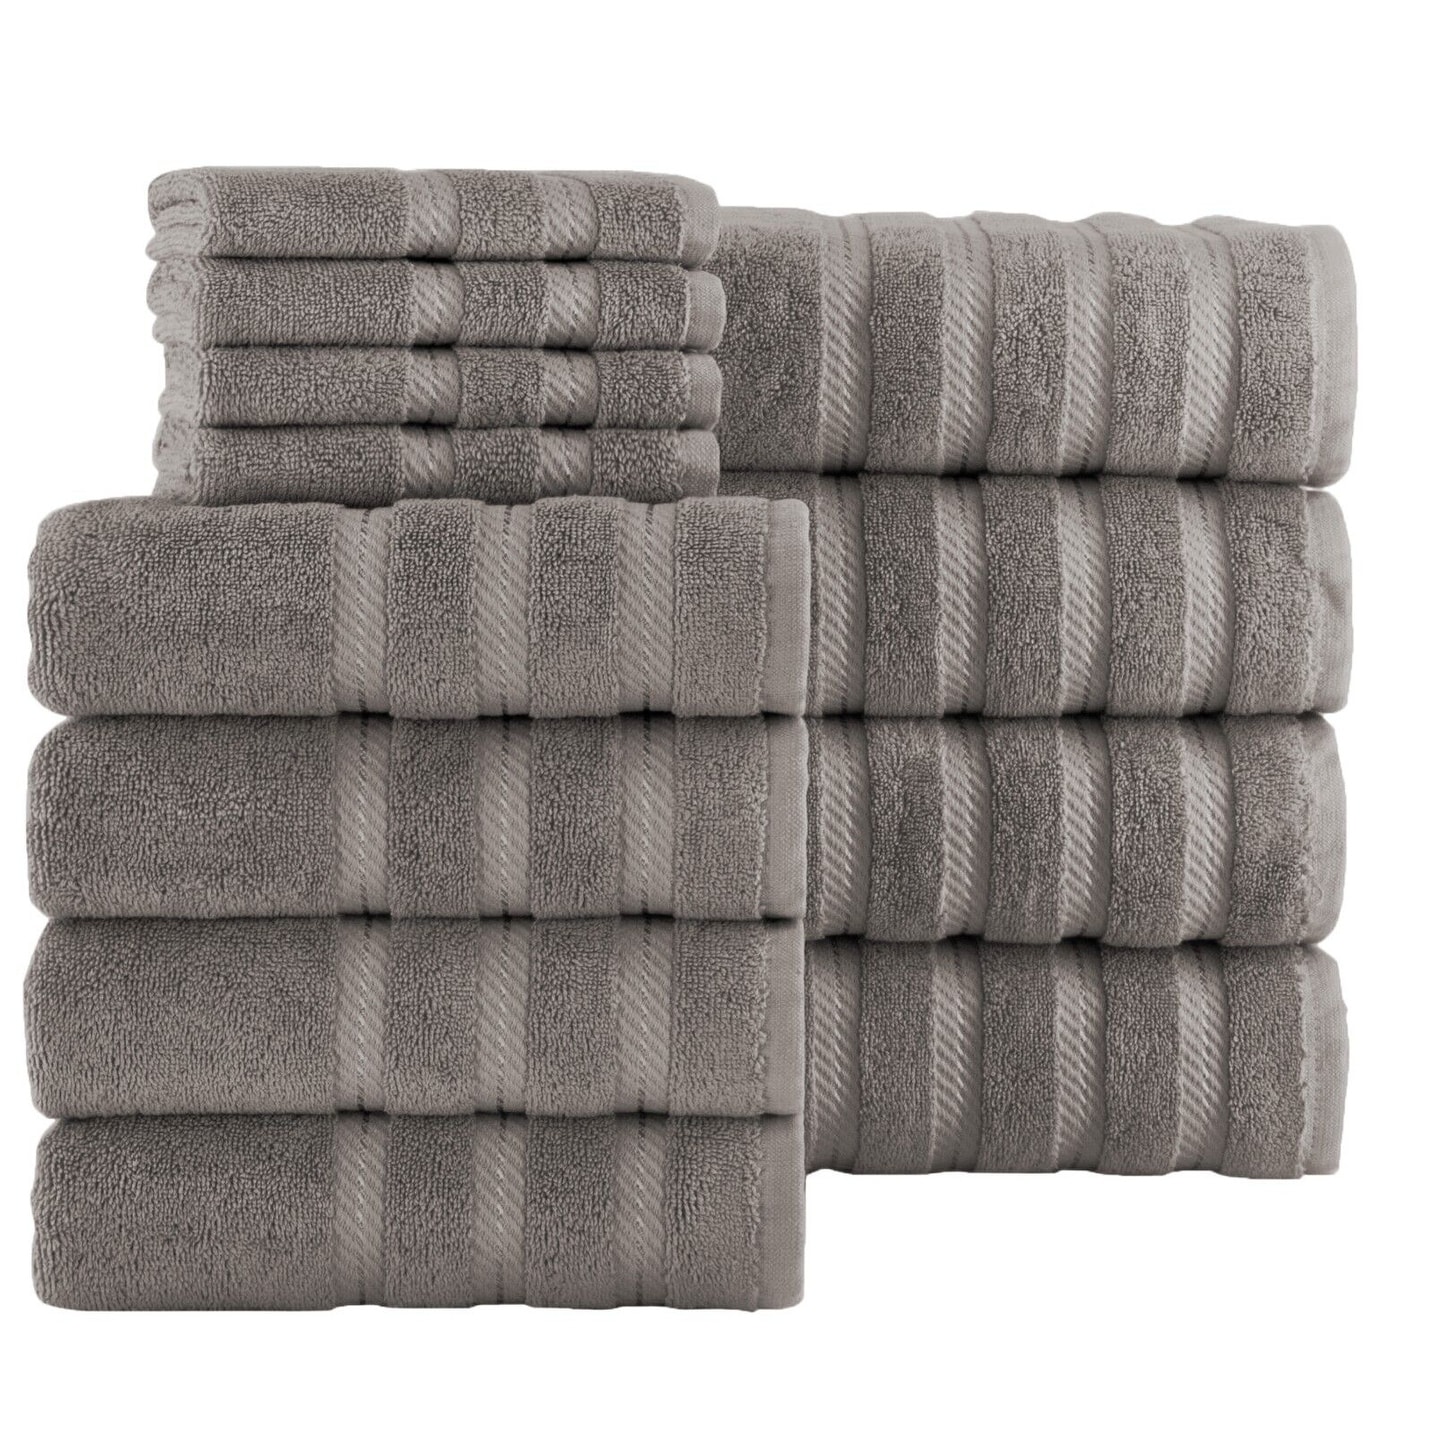 https://ak1.ostkcdn.com/images/products/is/images/direct/3f3d49c99b108b3ea42ce629c8a4ca415caf050d/Antalya-Hotel-Collection-Turkish-Cotton-Bathroom-Towel-12-Pc-Family-Set.jpg